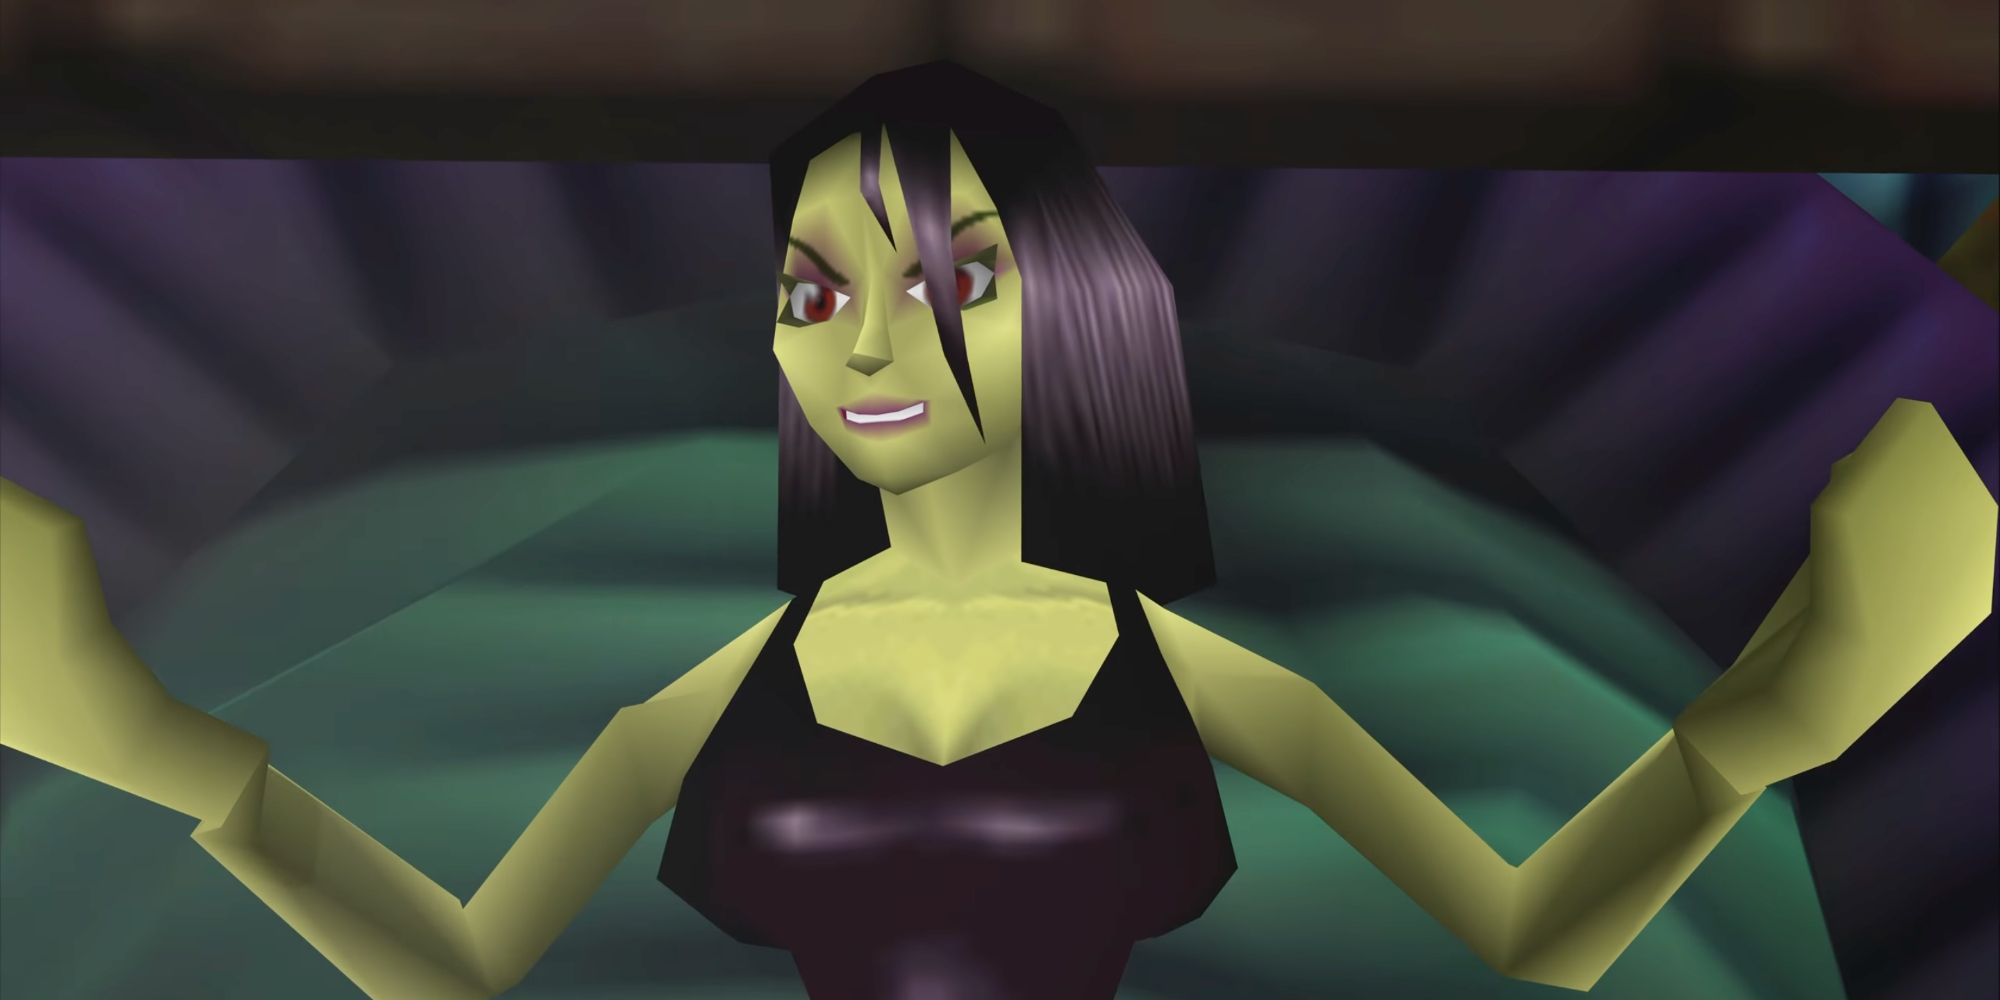 Post-transformation Gruntilda, from Banjo-Kazooie, looks at her new hot body with delight